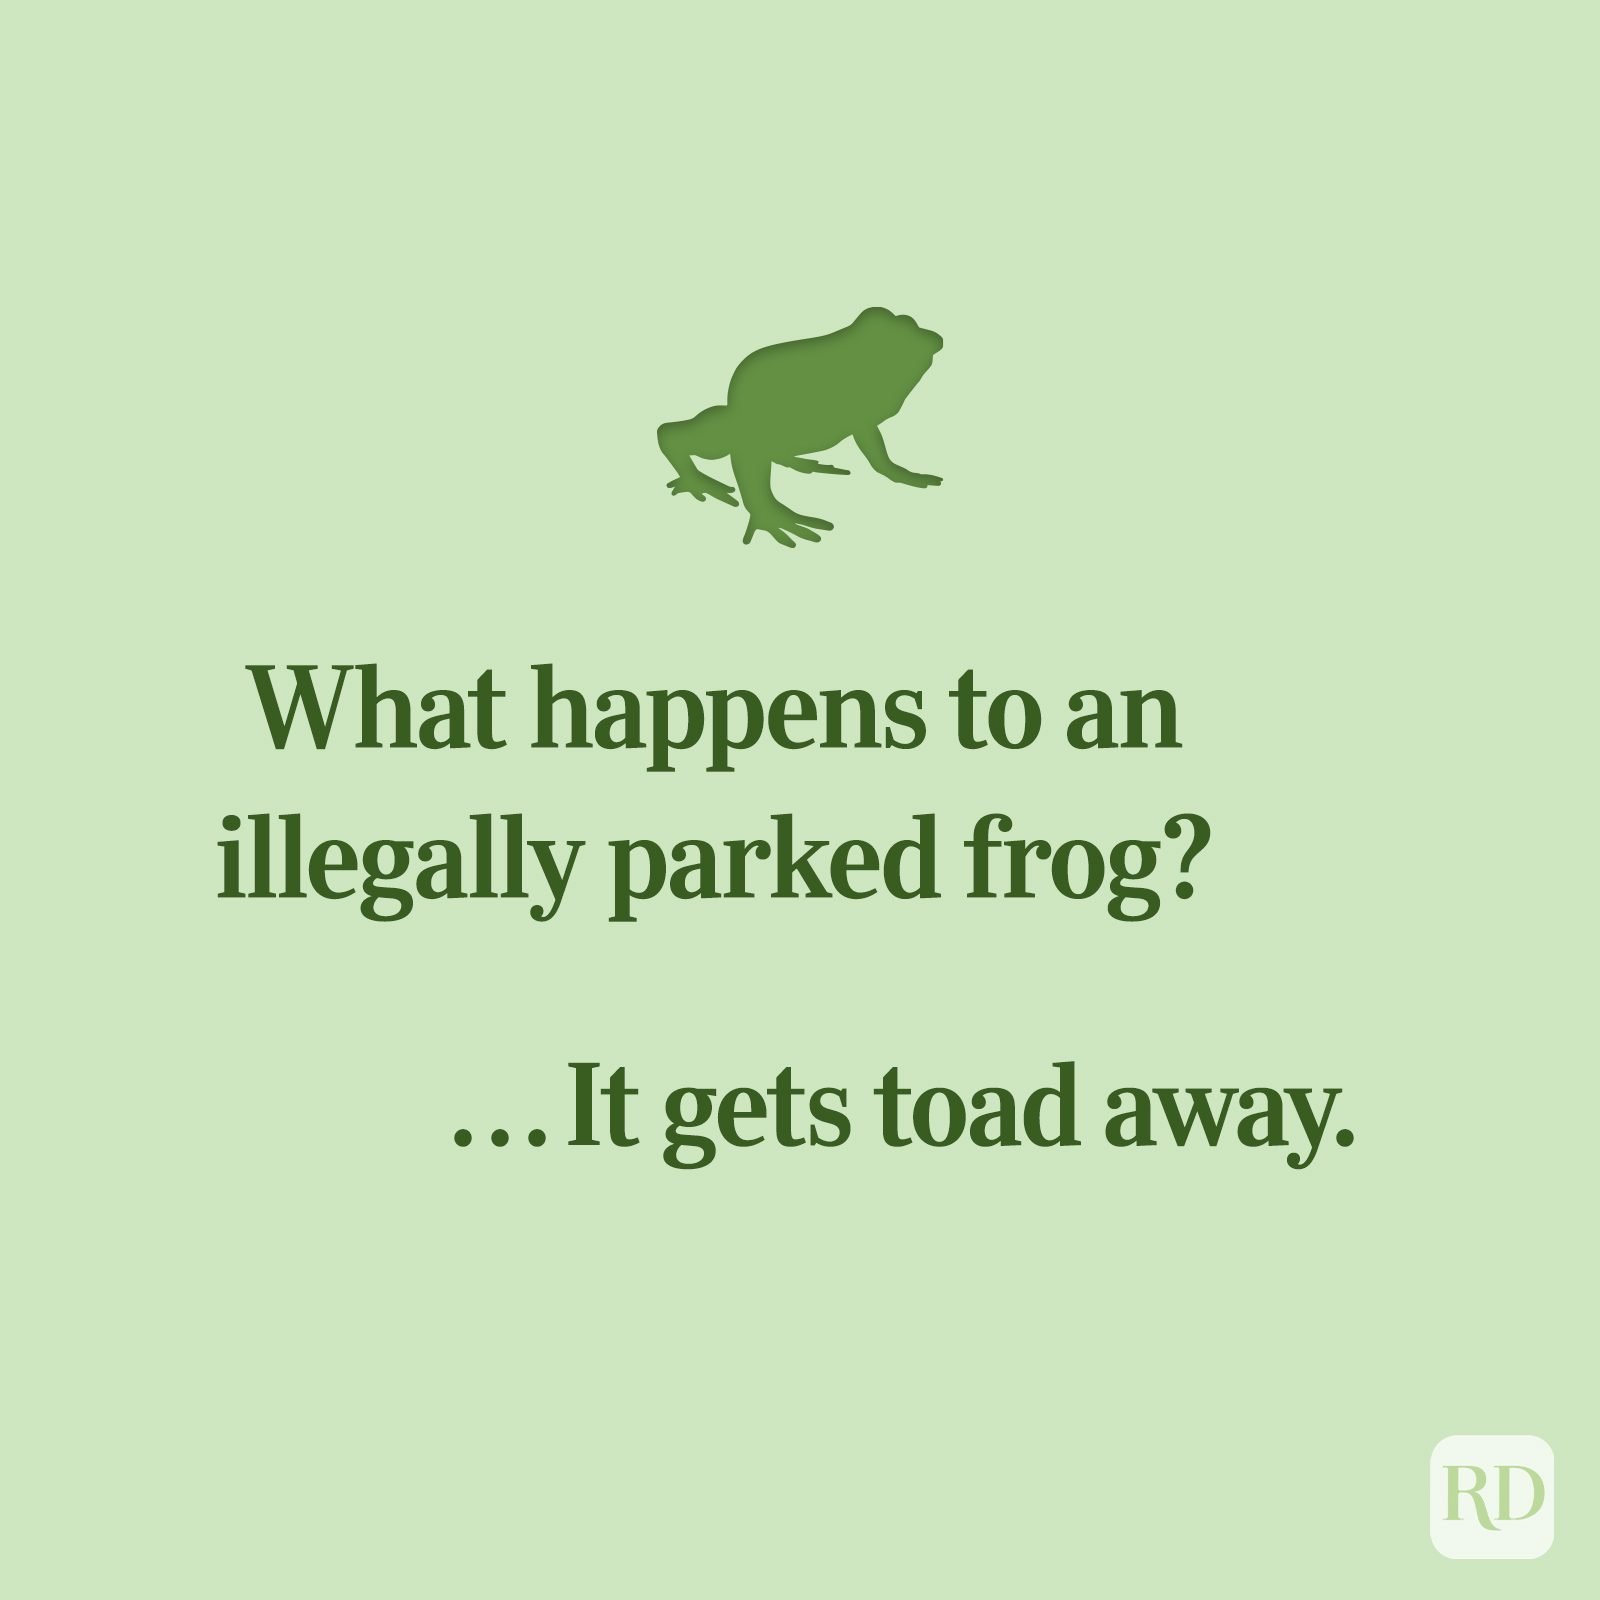 https://www.rd.com/wp-content/uploads/2018/10/100-funniest-quotes-2021_TOAD-0.jpg?fit=700%2C700